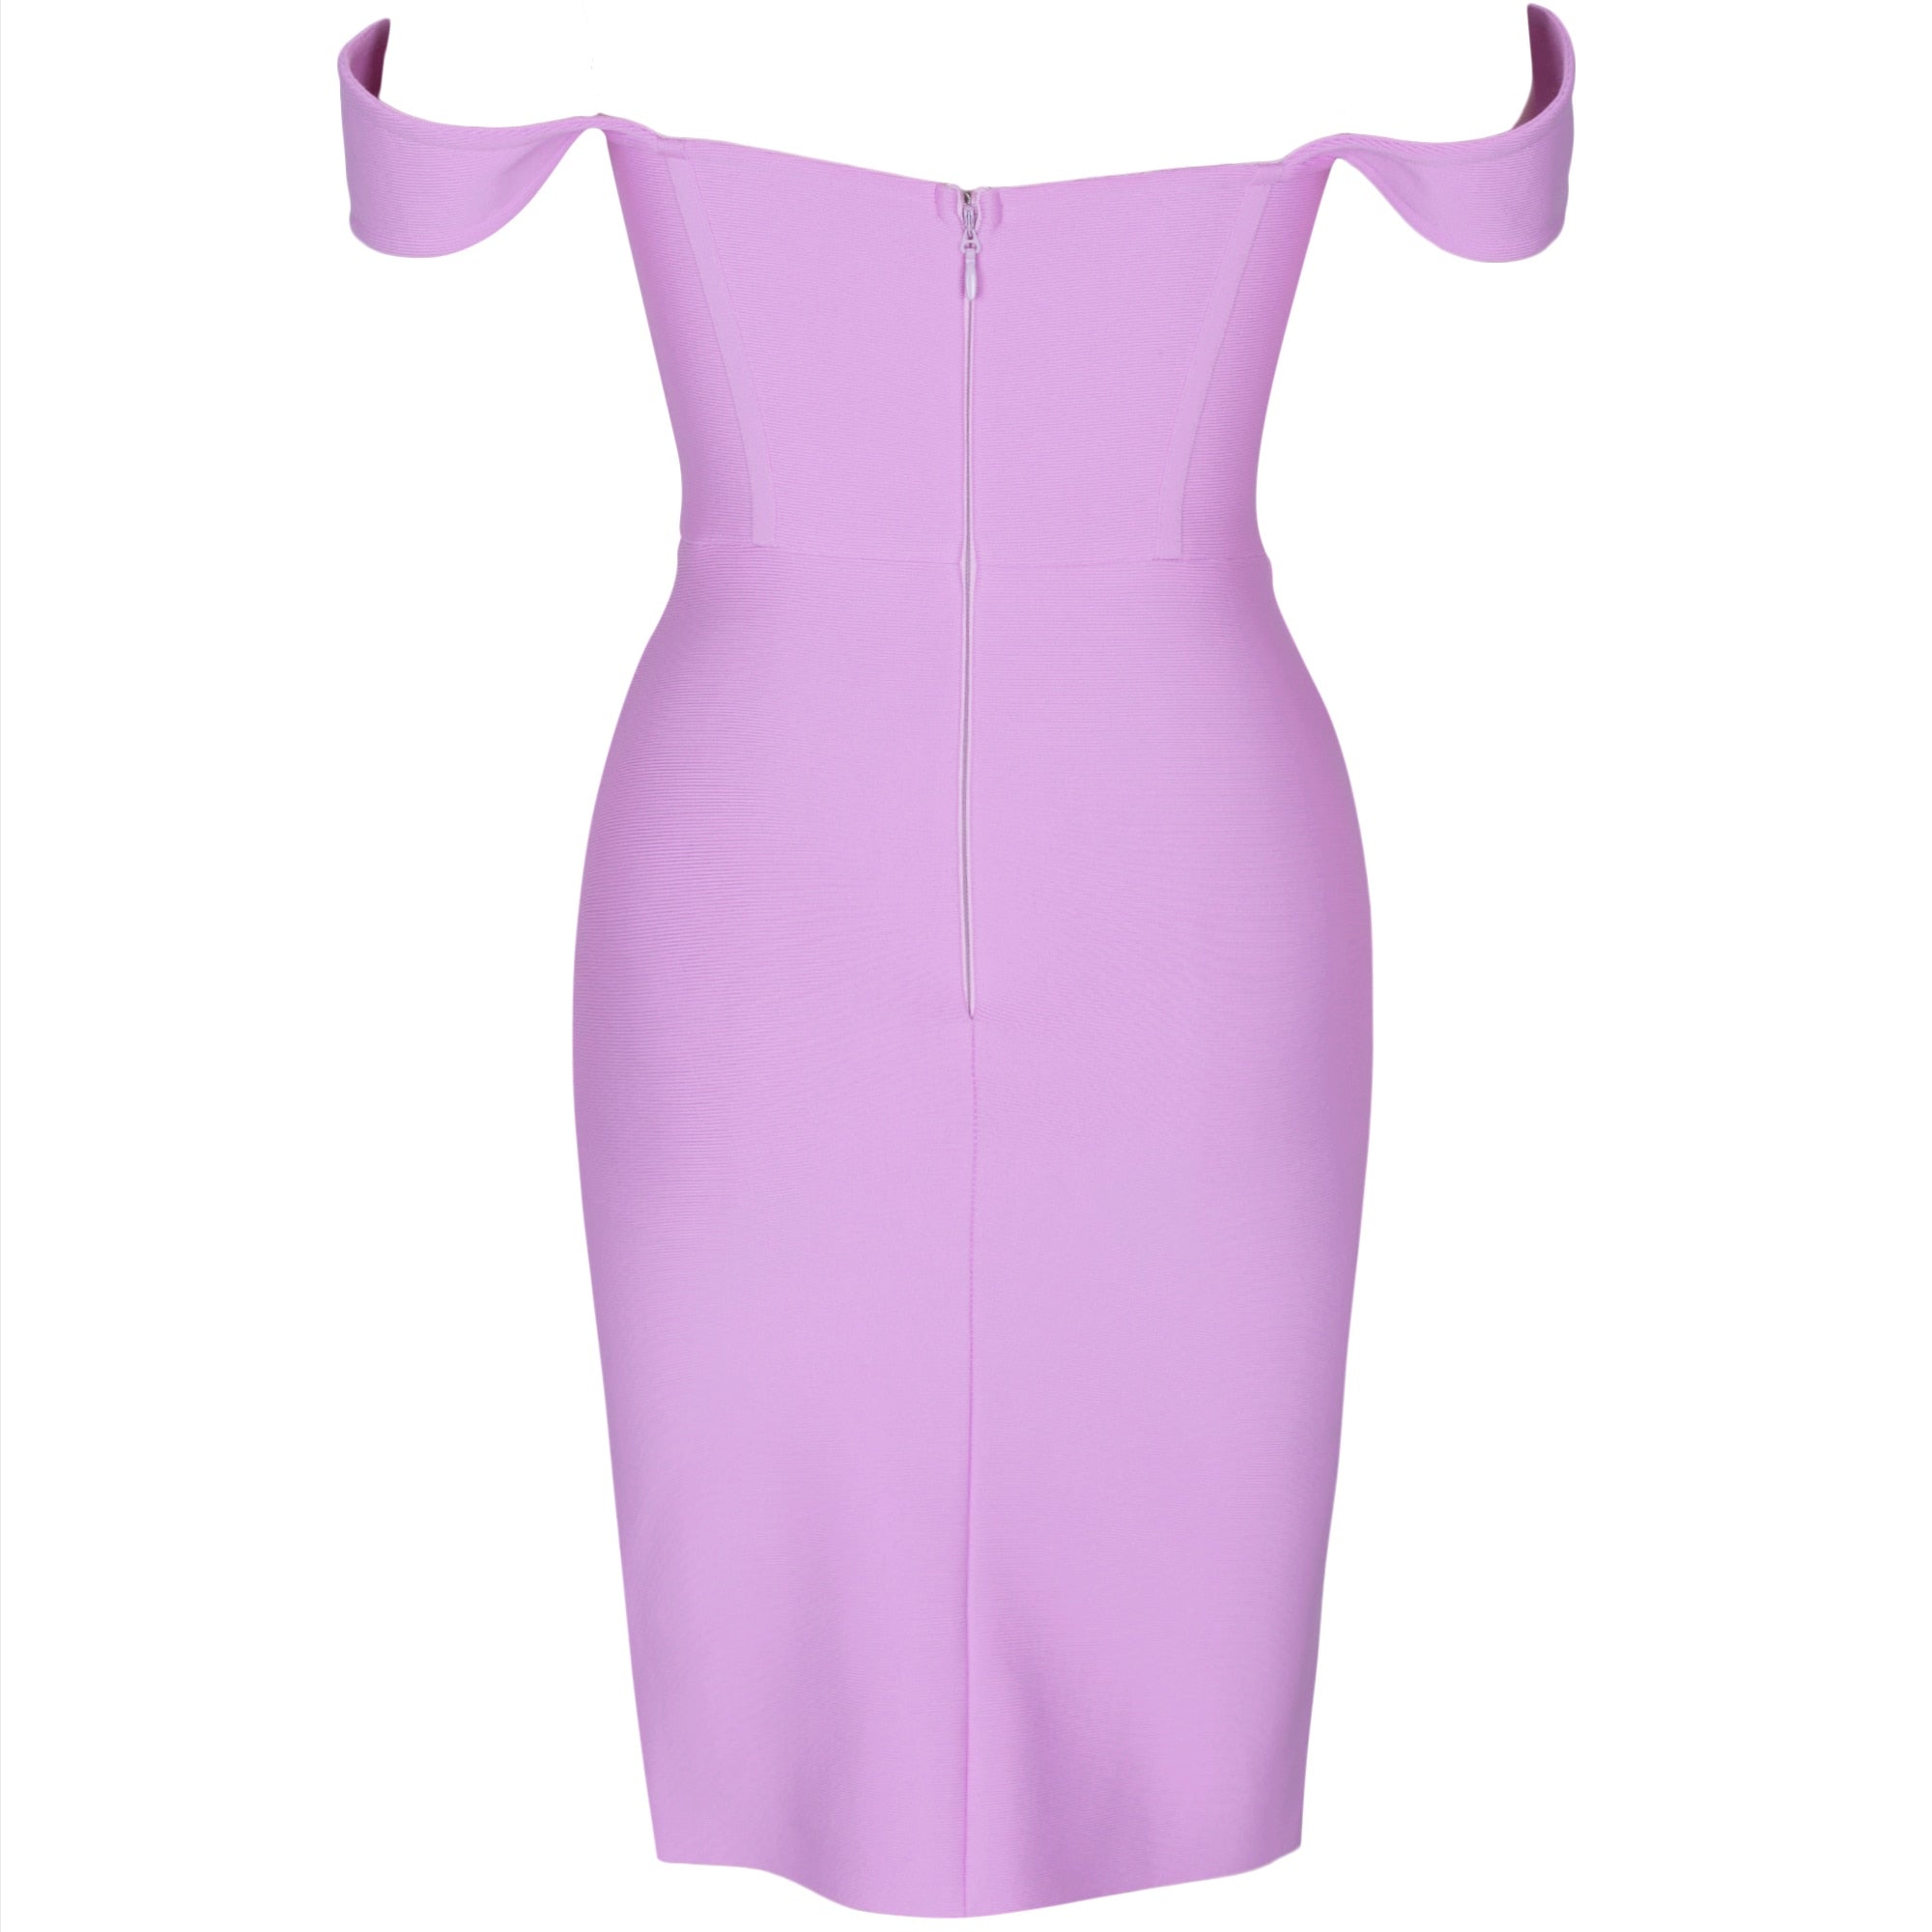 Bandage Dress 2021 Summer Lilac Purple Bodycon Dress  for Women Draped Off Shoulder Party Dress Evening Birthday Club Outfits